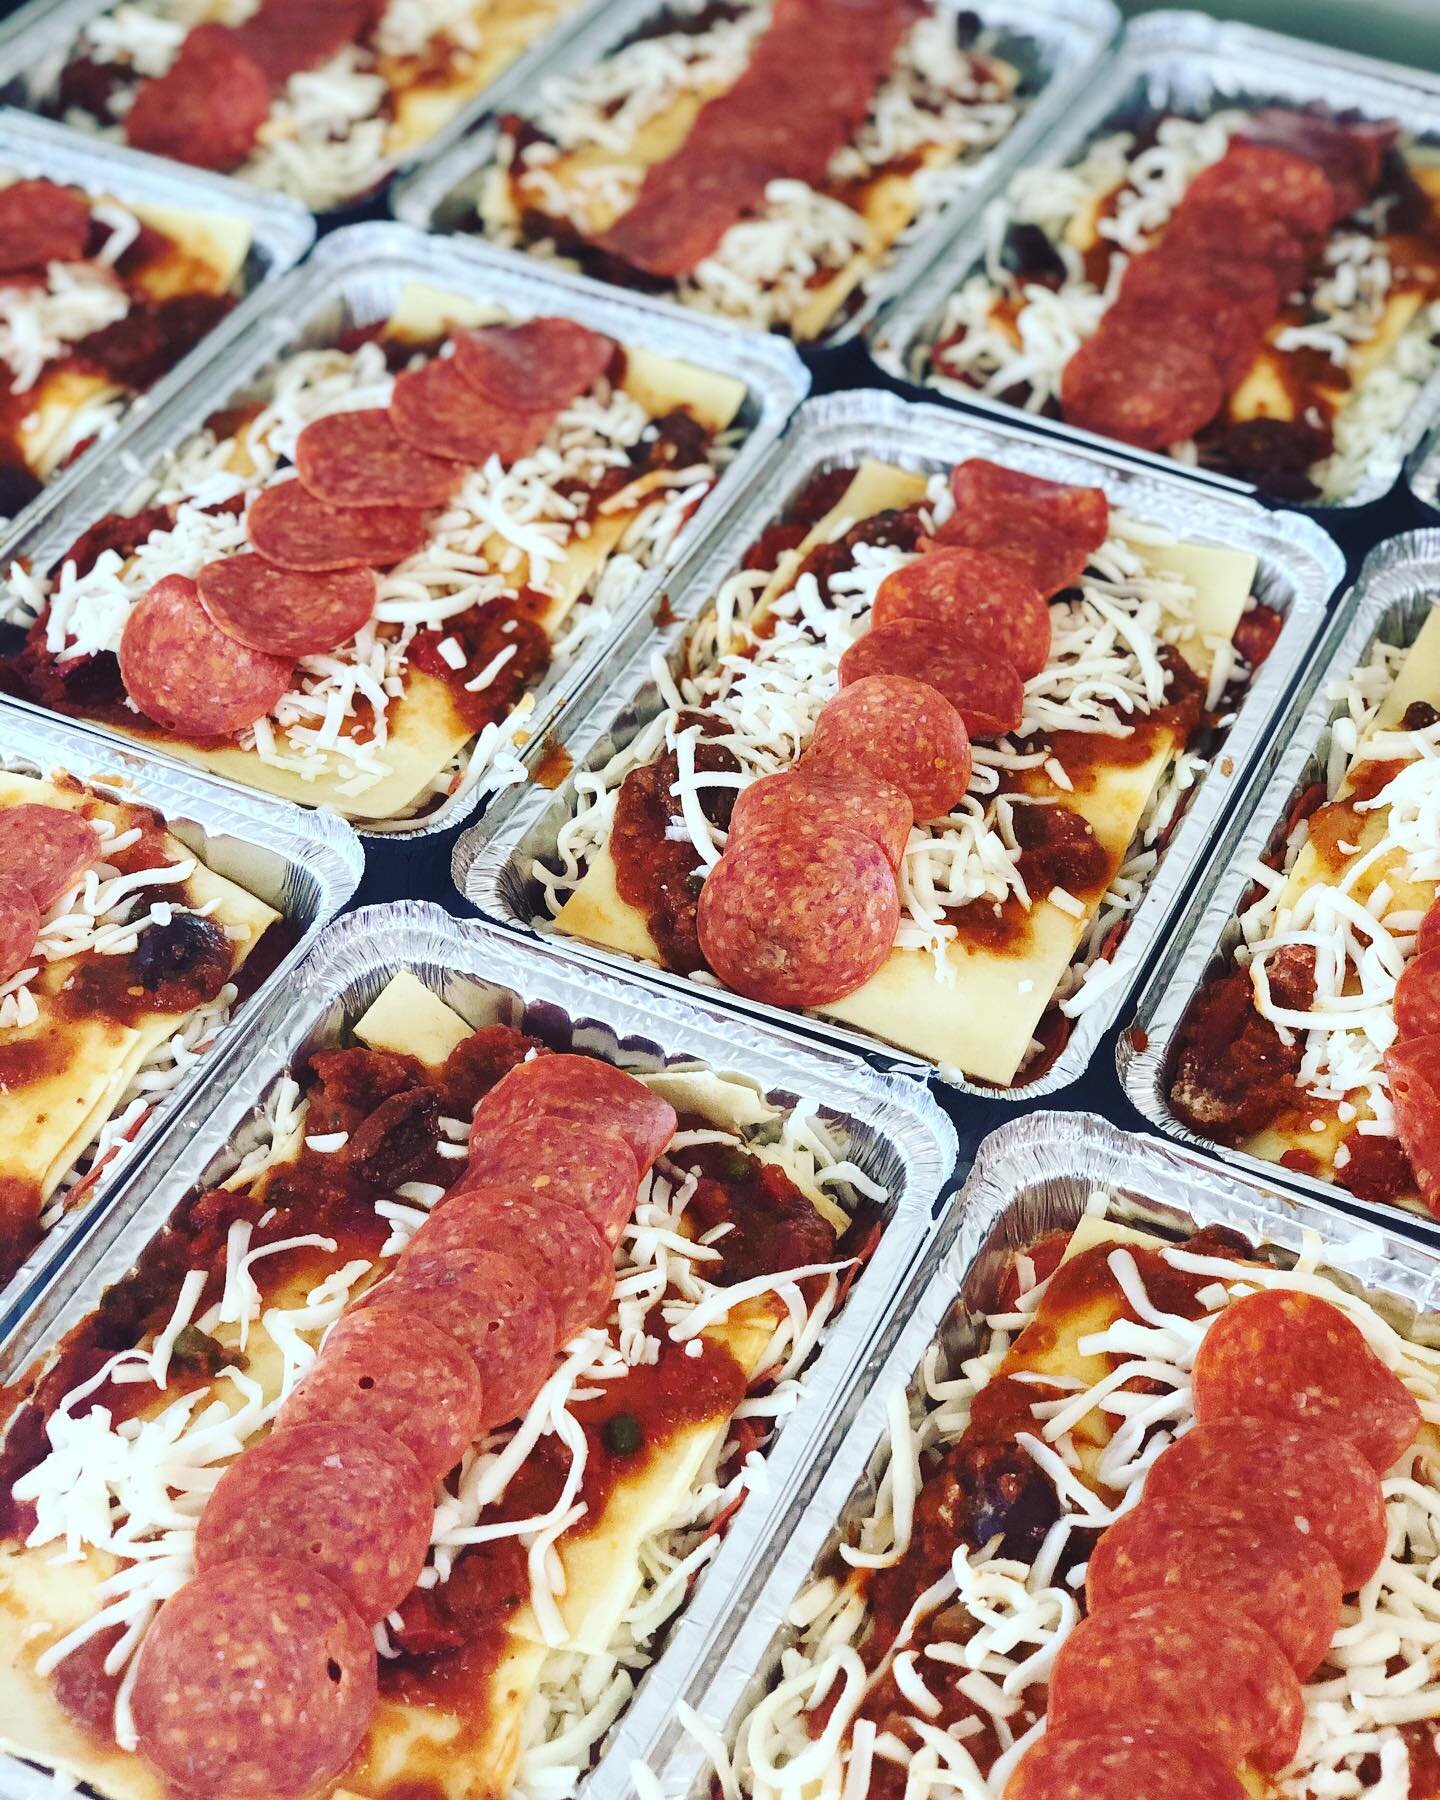 Fresh Individual Lasagne ready for the oven. 11 orders left. I&rsquo;m firing to order. Text me 30 minutes out and I will fire. 😊

Saturday 9/5
Lasagne with Bolognese, Ricotta, Pepperoni, Basil, Mozzarella Gratin $12 ea/40 family of 4

Chef Kenny&rs